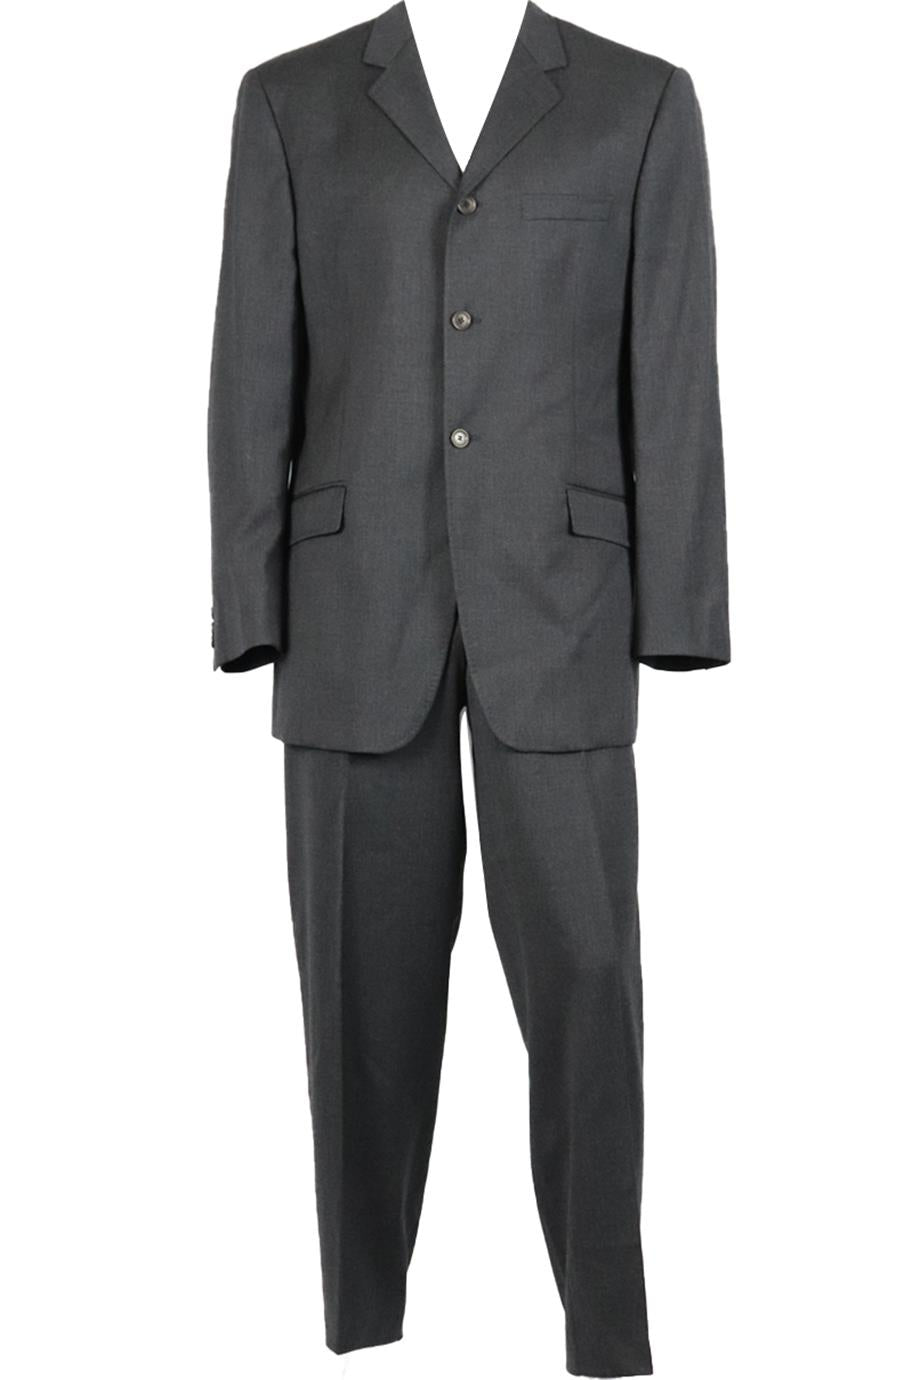 DOLCE AND GABBANA MEN'S WOOL BLEND TWO PIECE SUIT IT 52 UK/US CHEST 42